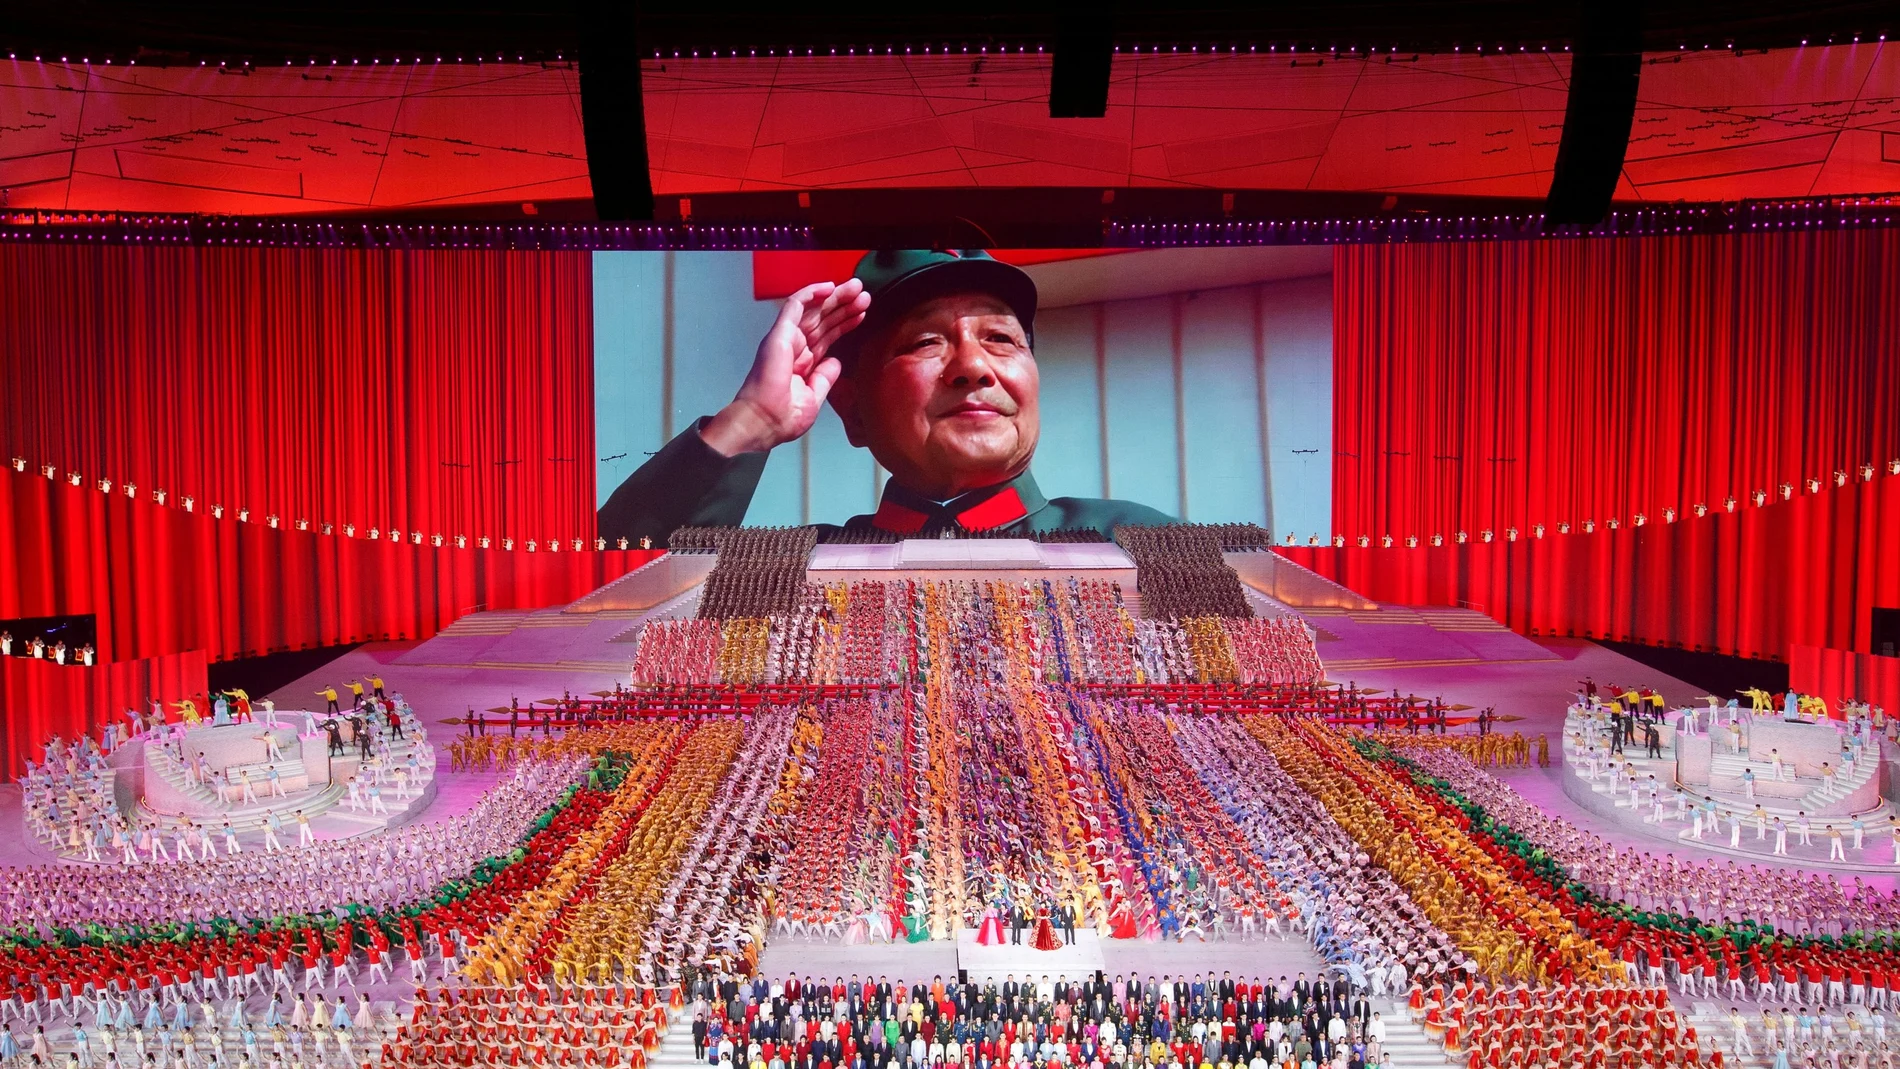 A screen shows late Chinese leader Deng Xiaoping during a show commemorating the 100th anniversary of the founding of the Communist Party of China at the National Stadium in Beijing, China June 28, 2021. REUTERS/Thomas Peter